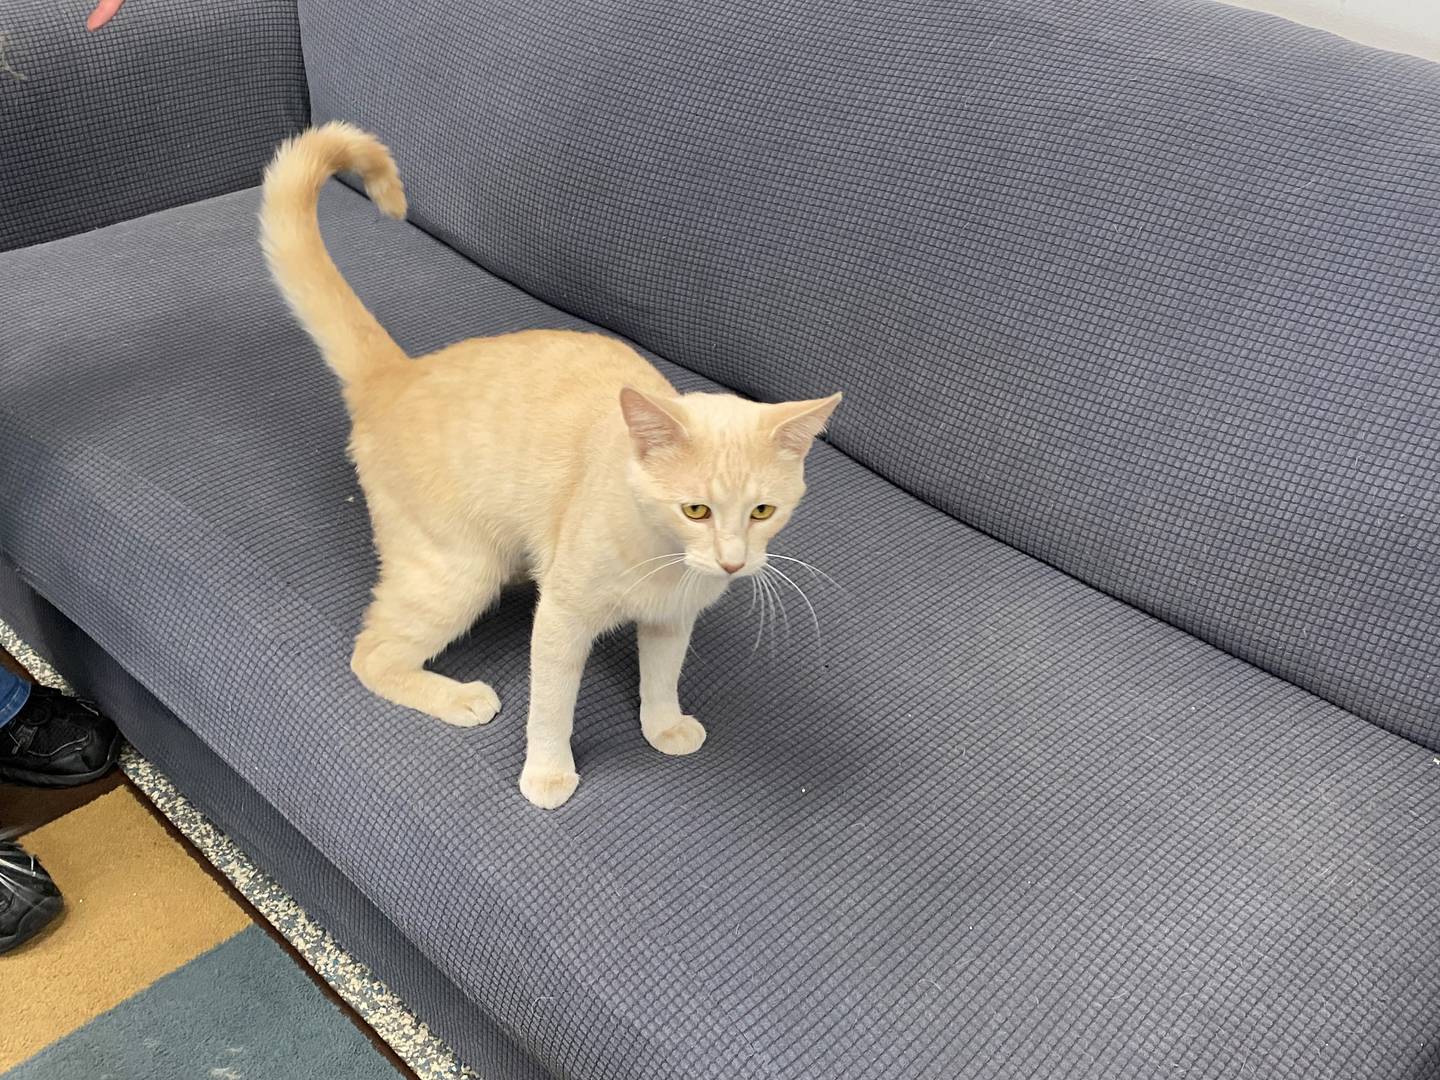 Gwenyth is a three-and-a-half year old cat who has been declawed. She likes her naptime and has a brother named Gatsby. Both are available for adoption.